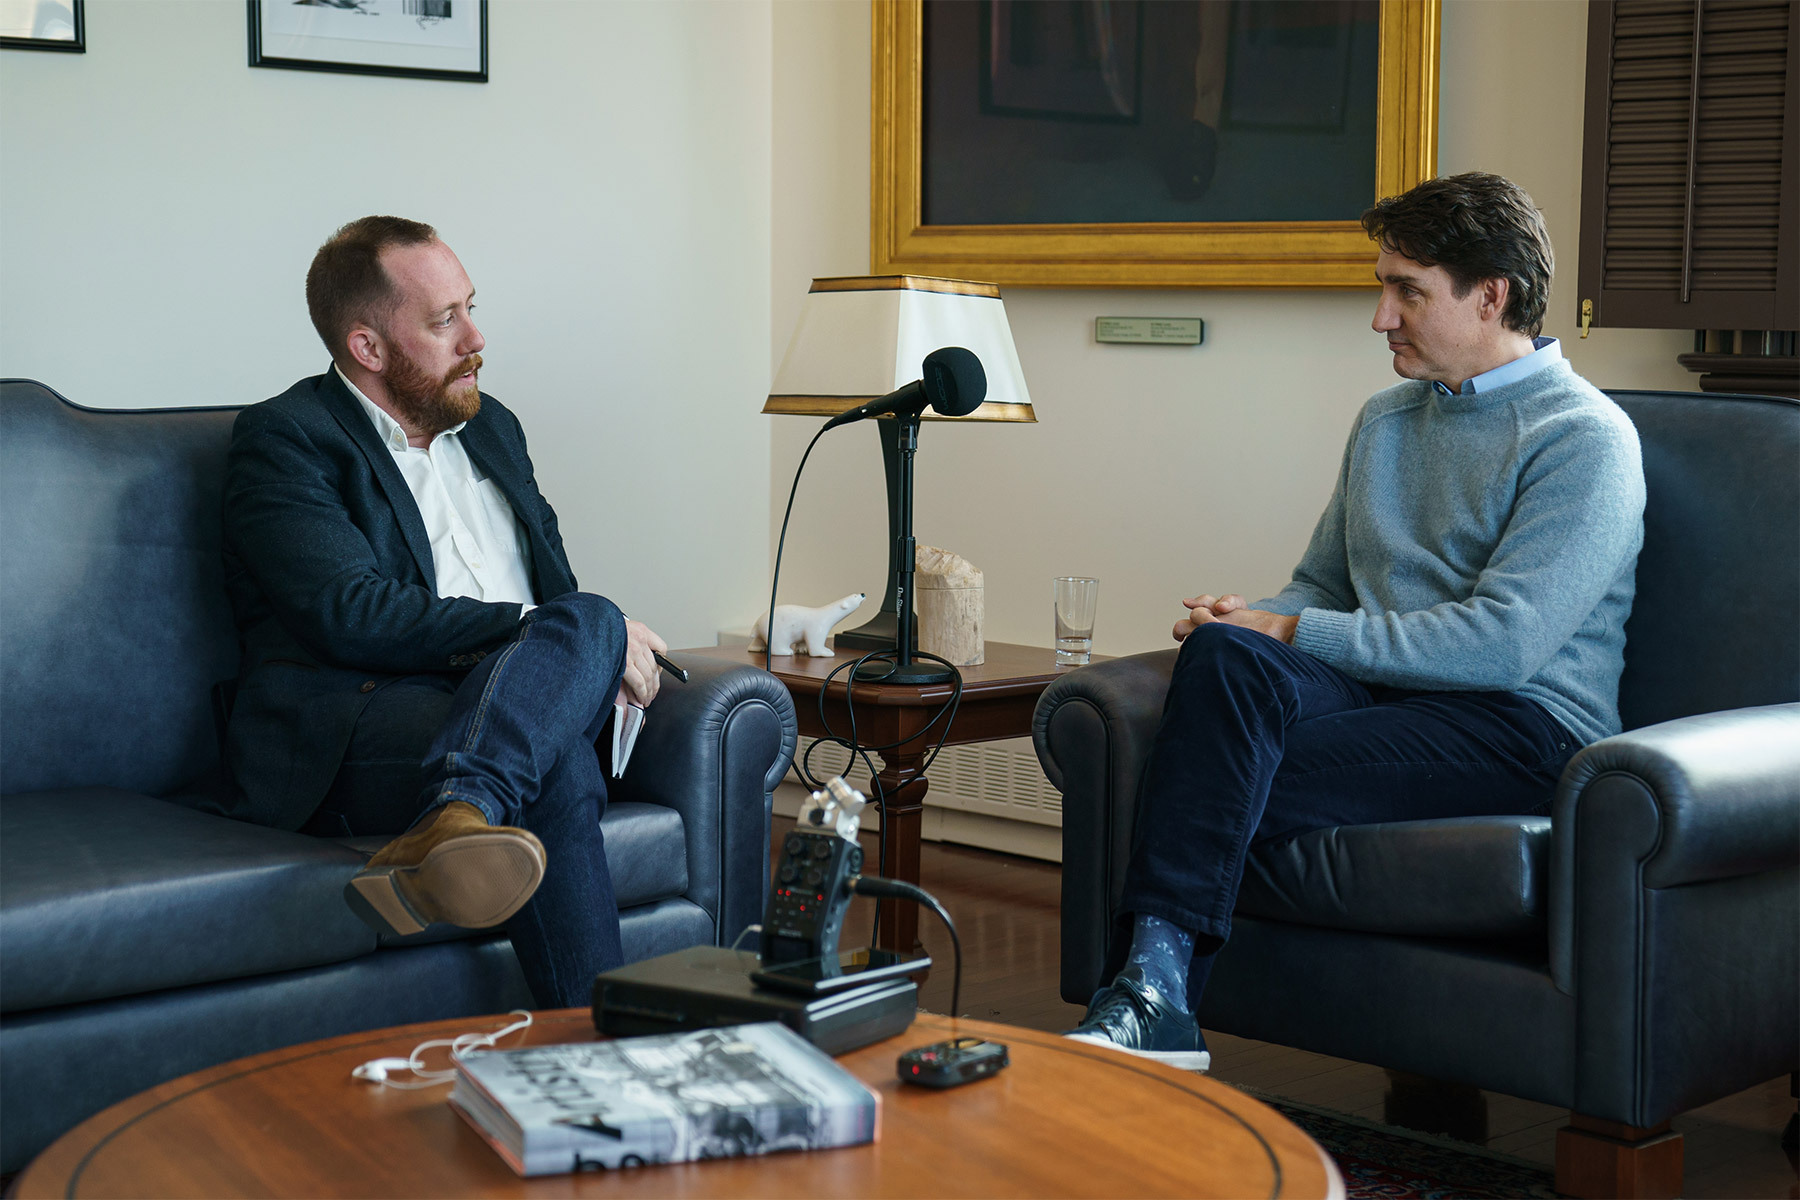 Journalist Justin Ling sits on a blue couch across from Justin Trudeau, seated in a blue arm chair with a microphone on the table between them.